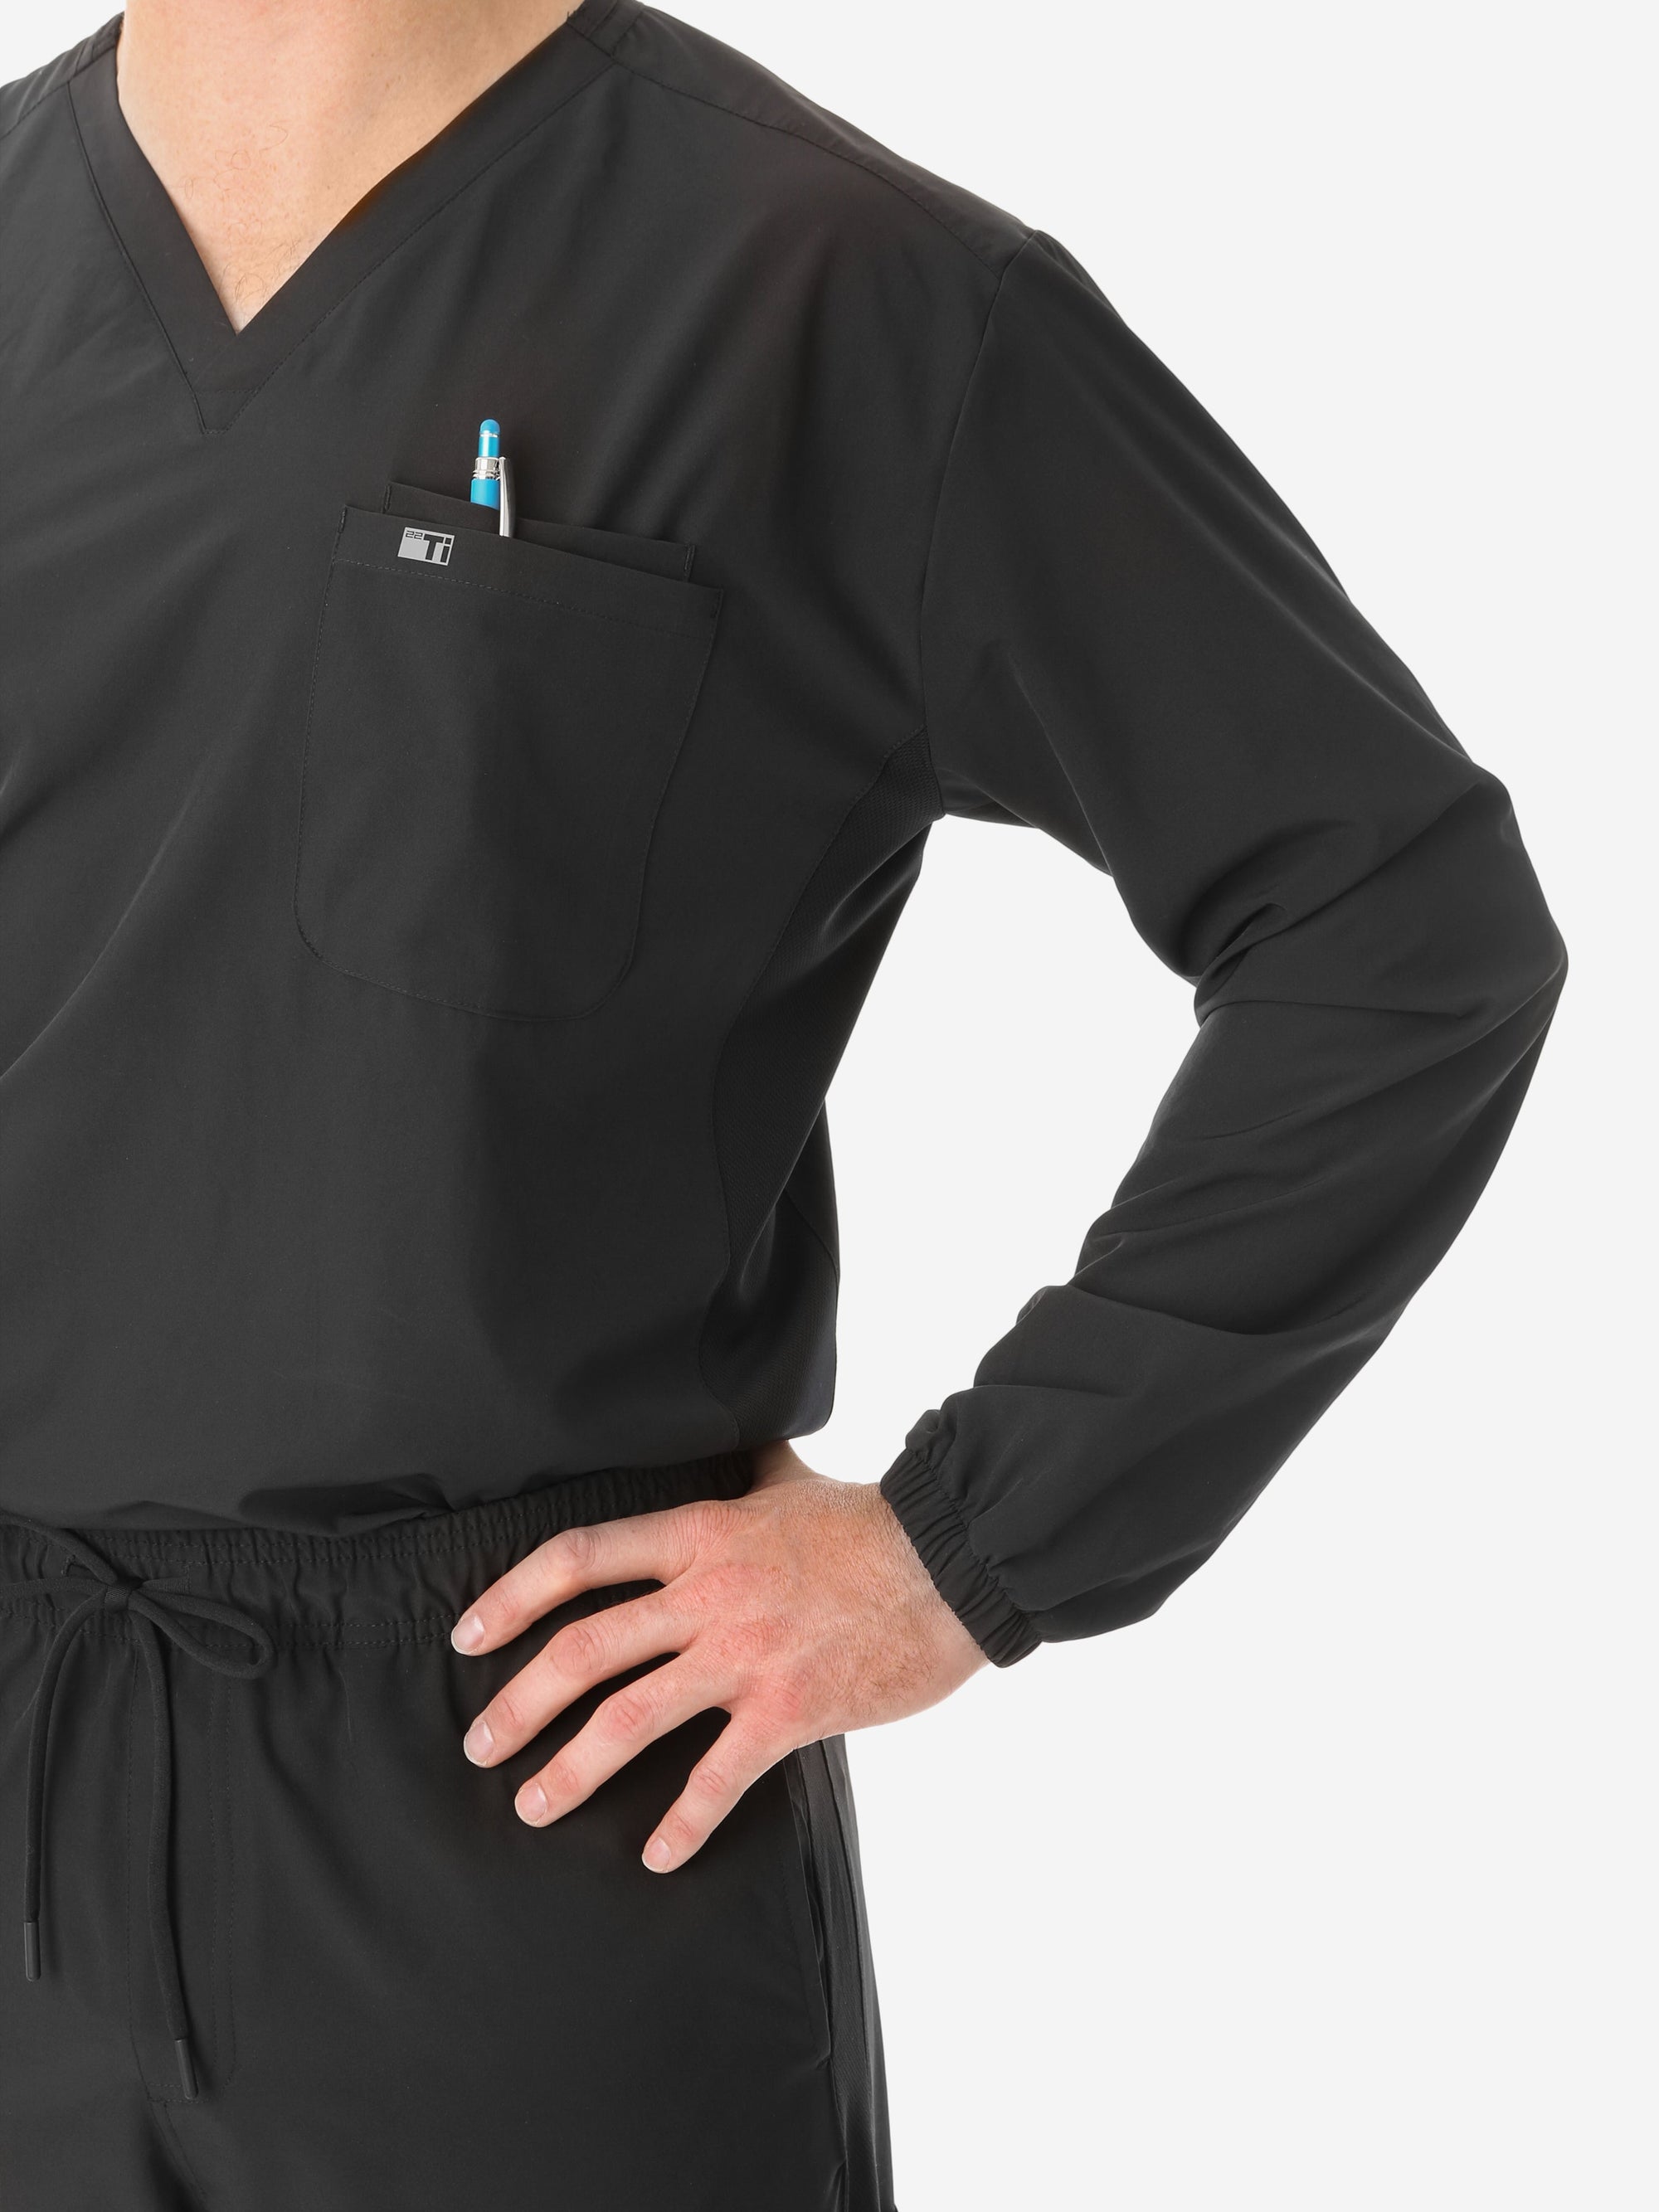 Men's Long Sleeve Scrub Top with Two Chest Pockets Real Black Front View Pockets Closeup